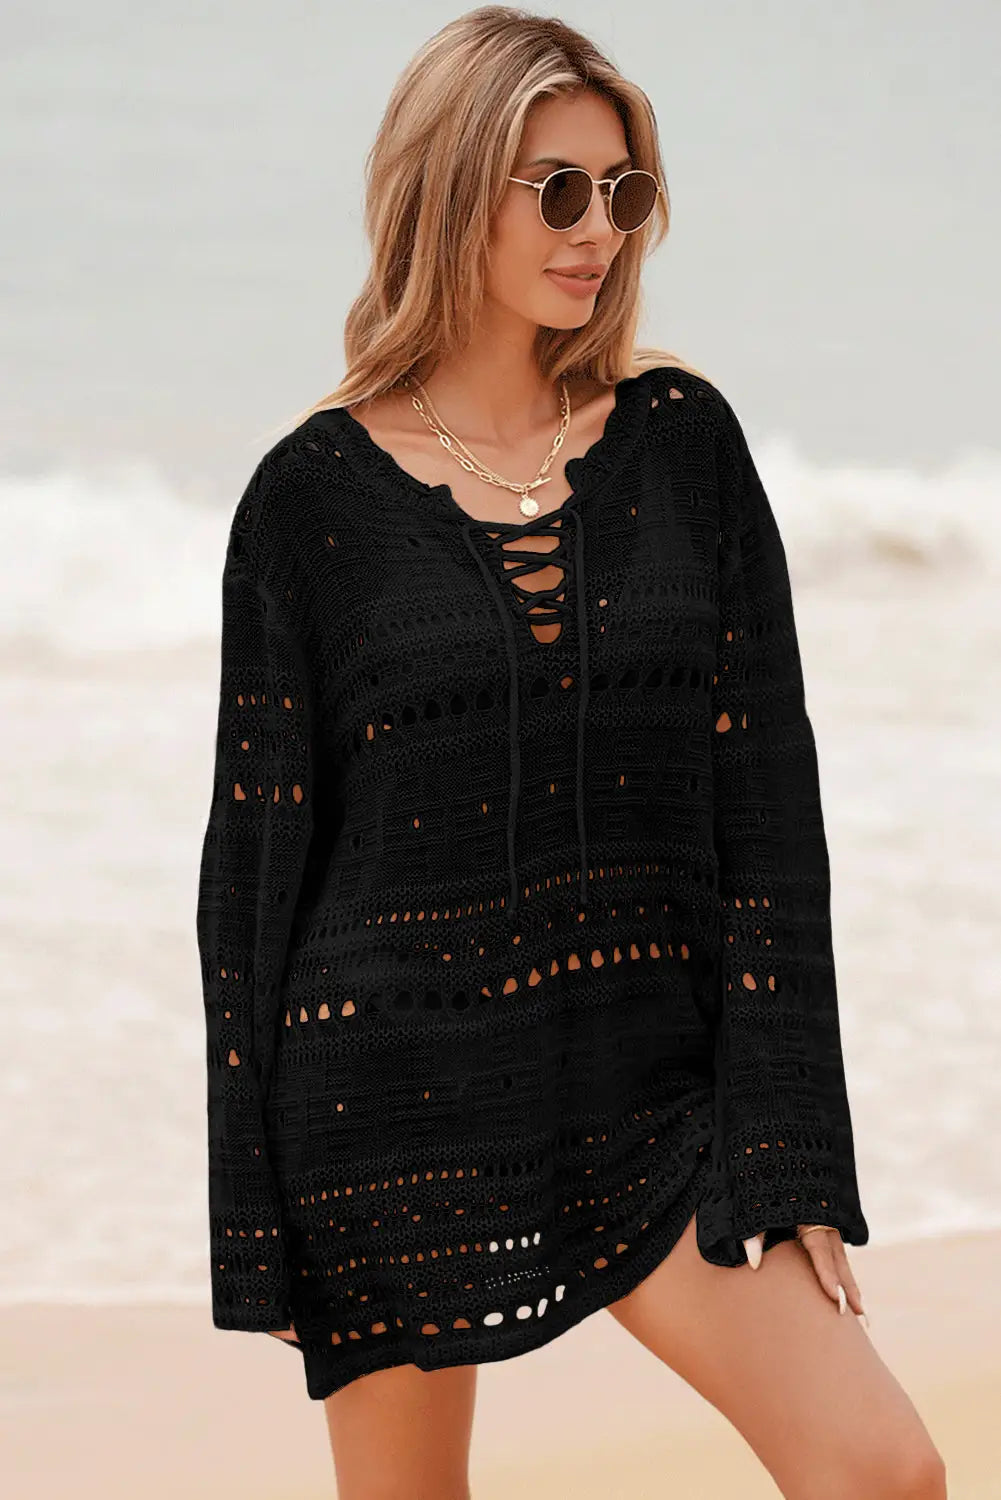 White lace-up long sleeve cover up - beach cover-ups